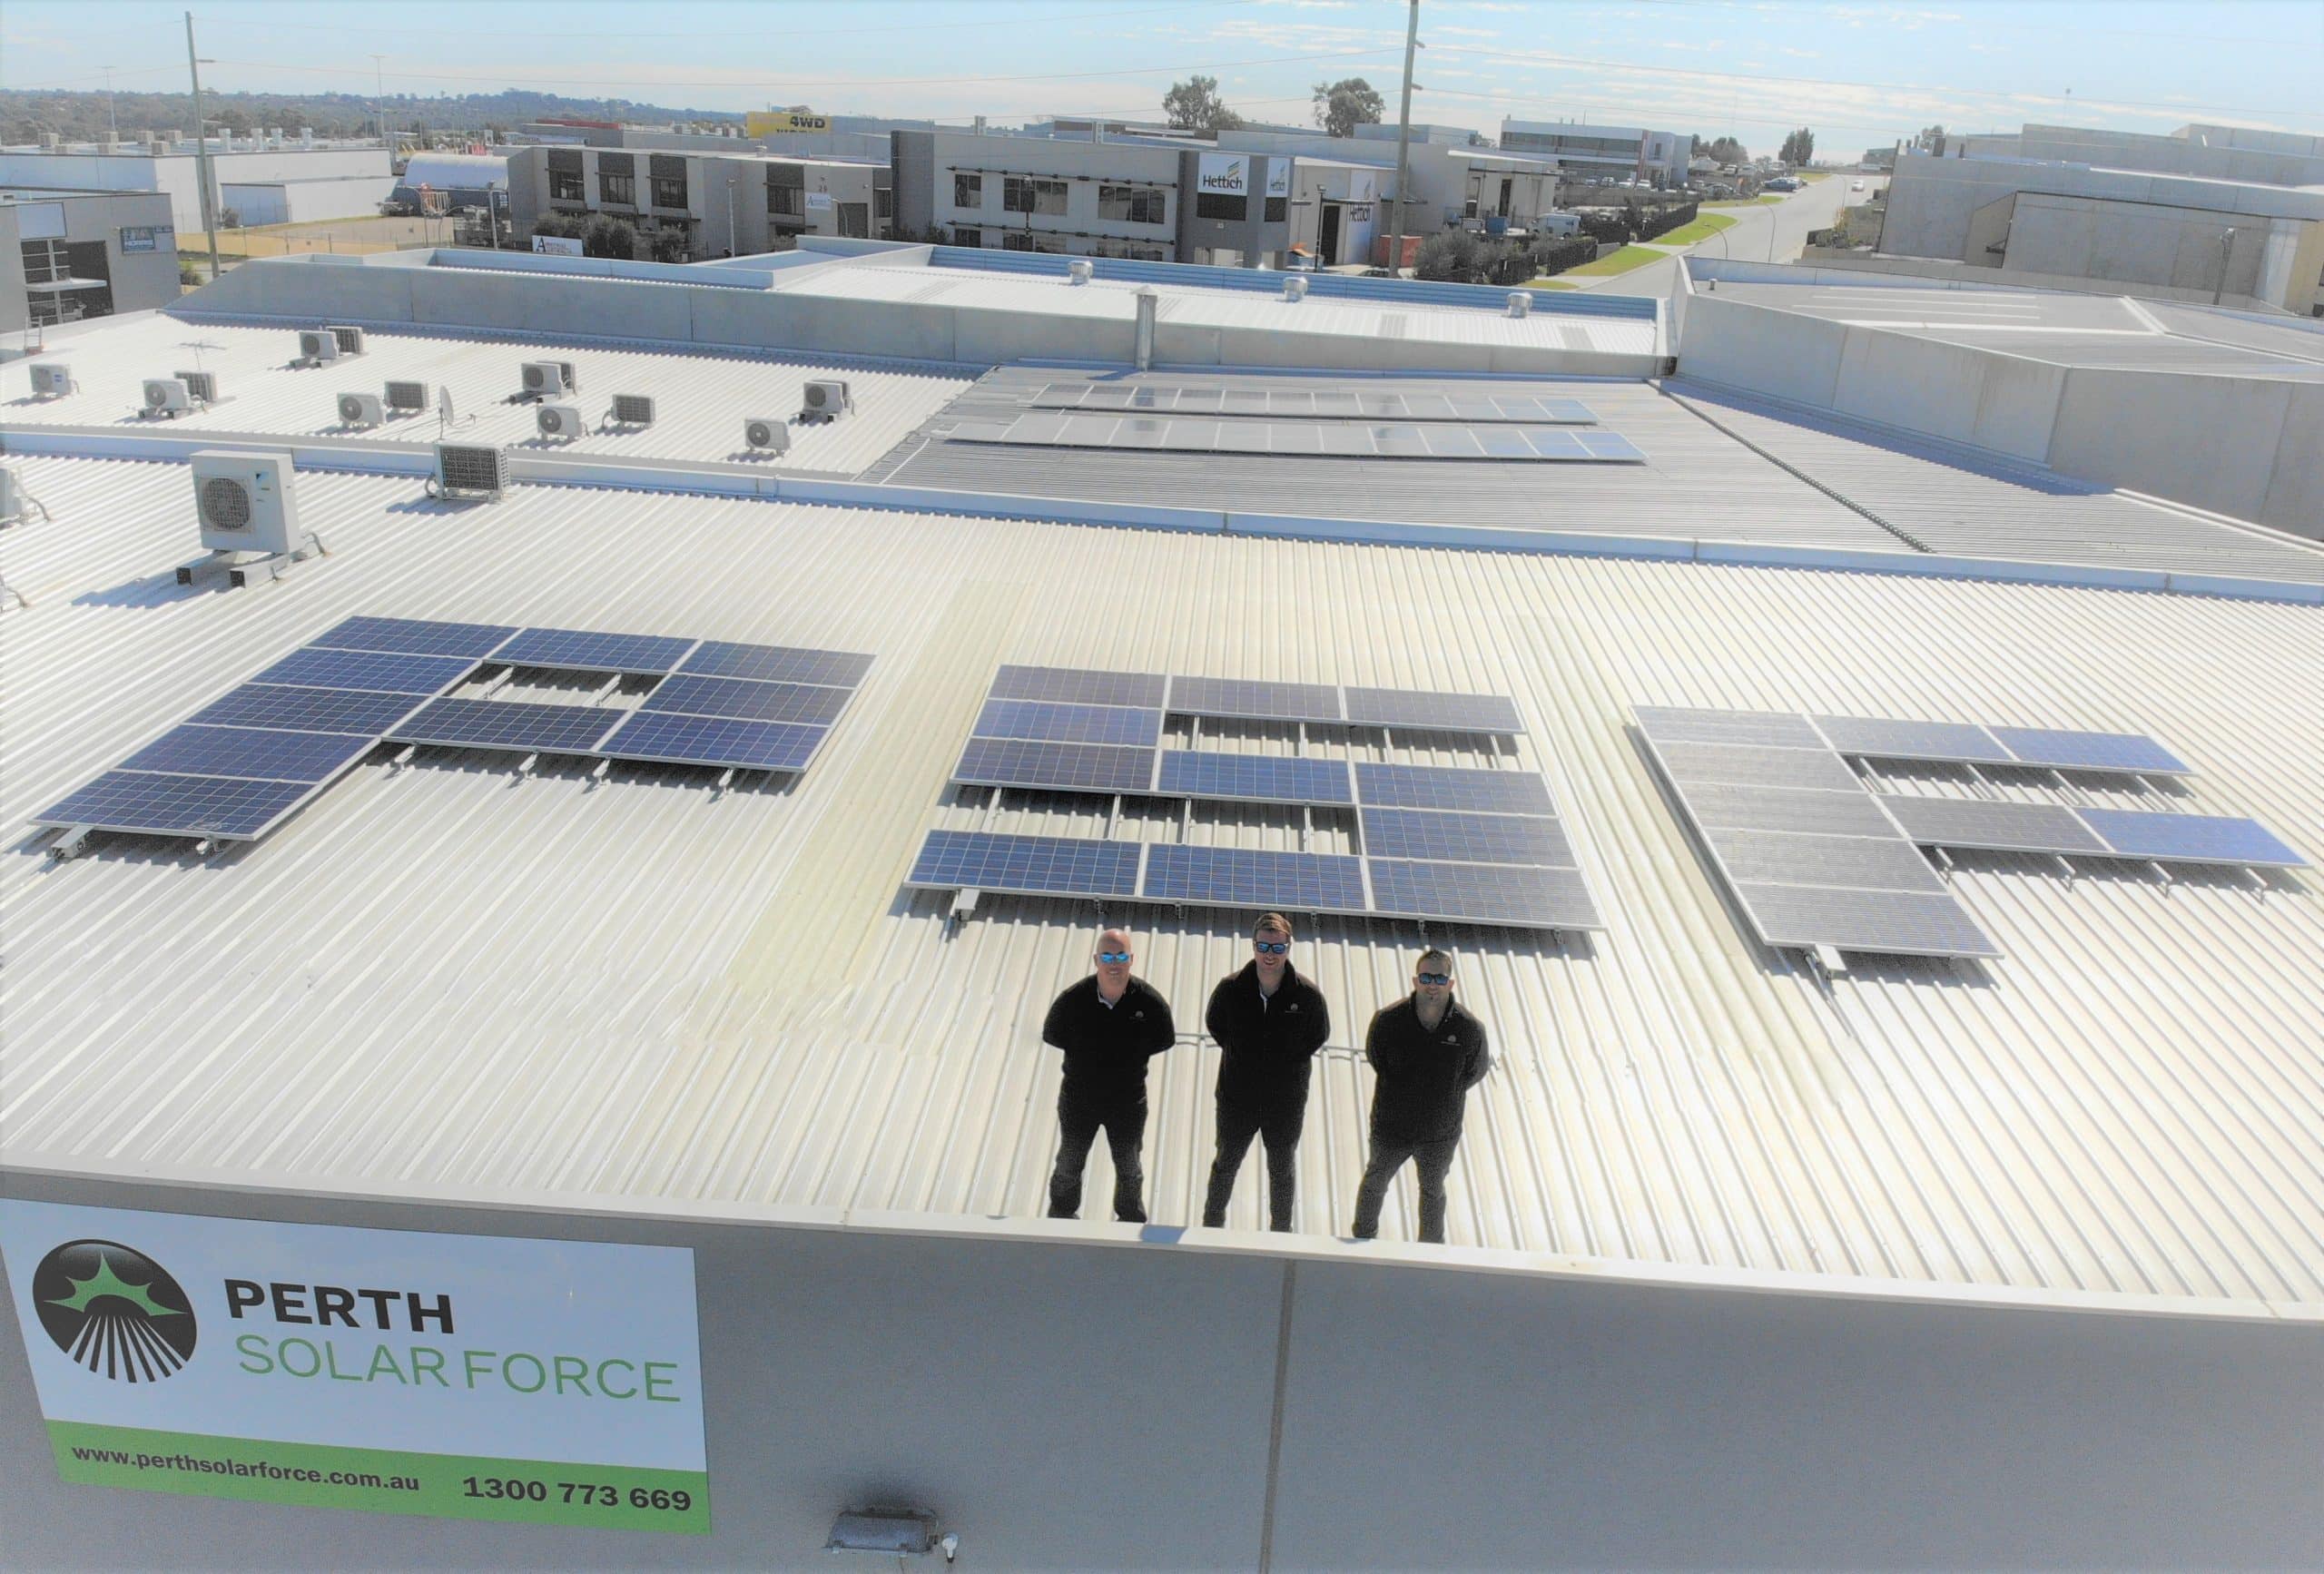 Perth Solar Force Directors On The Roof Of The PSF Building